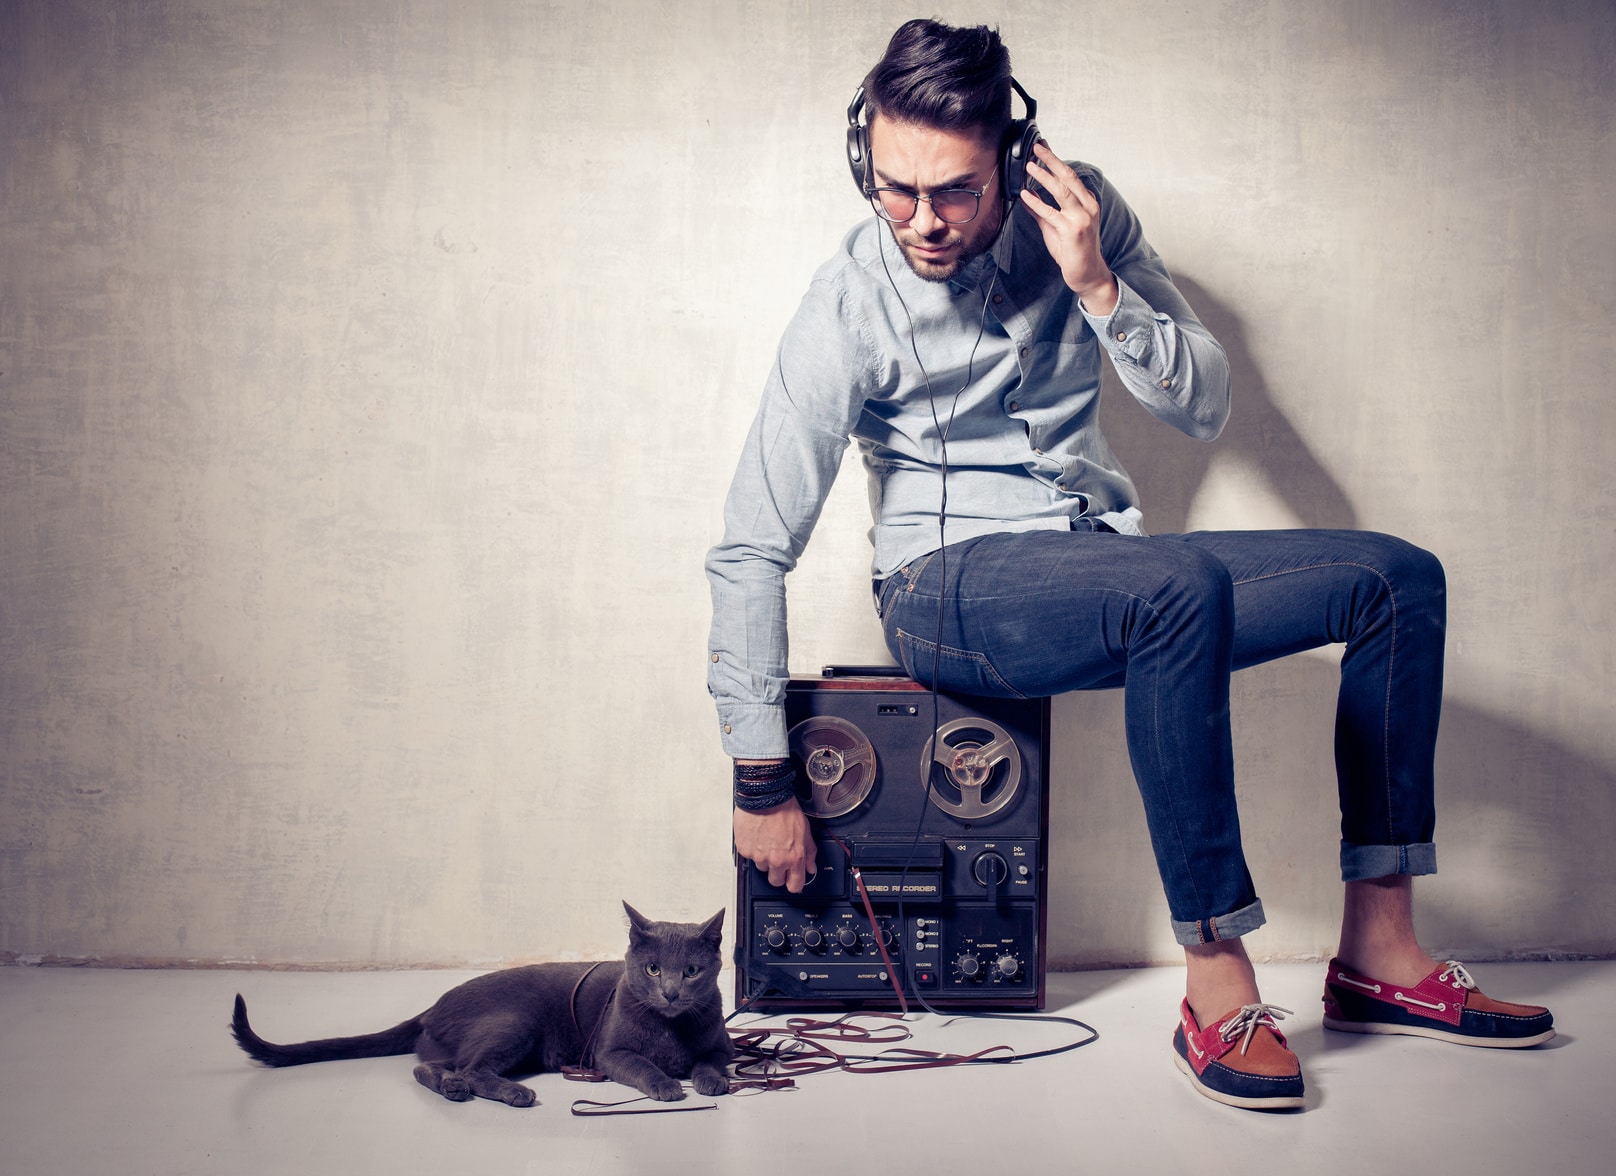 handsome man and cat listening to music on a magnetophone against grunge wall